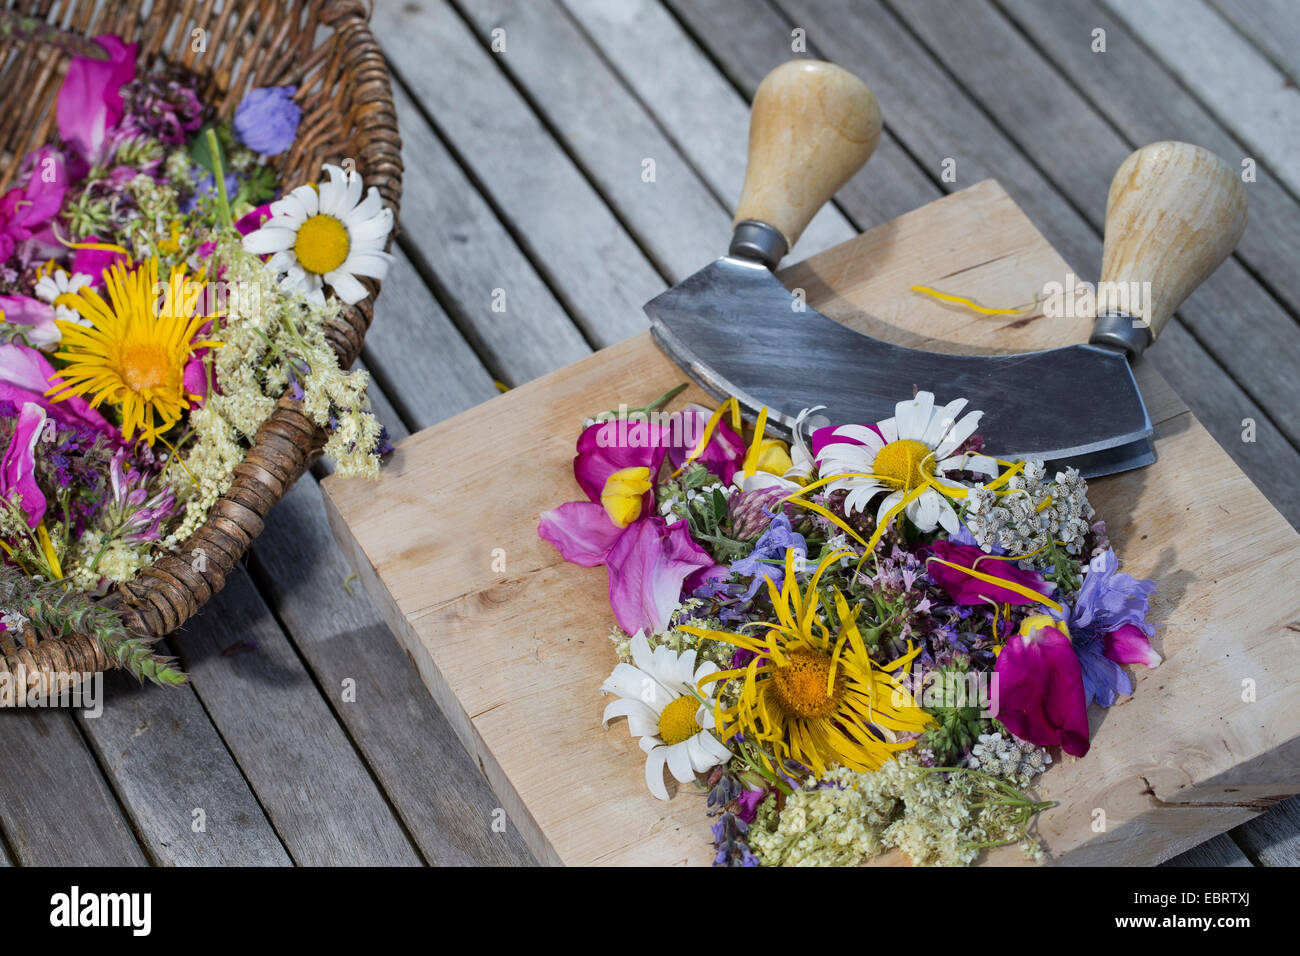 eatable petals in a basket with a knife, Germany Stock Photo